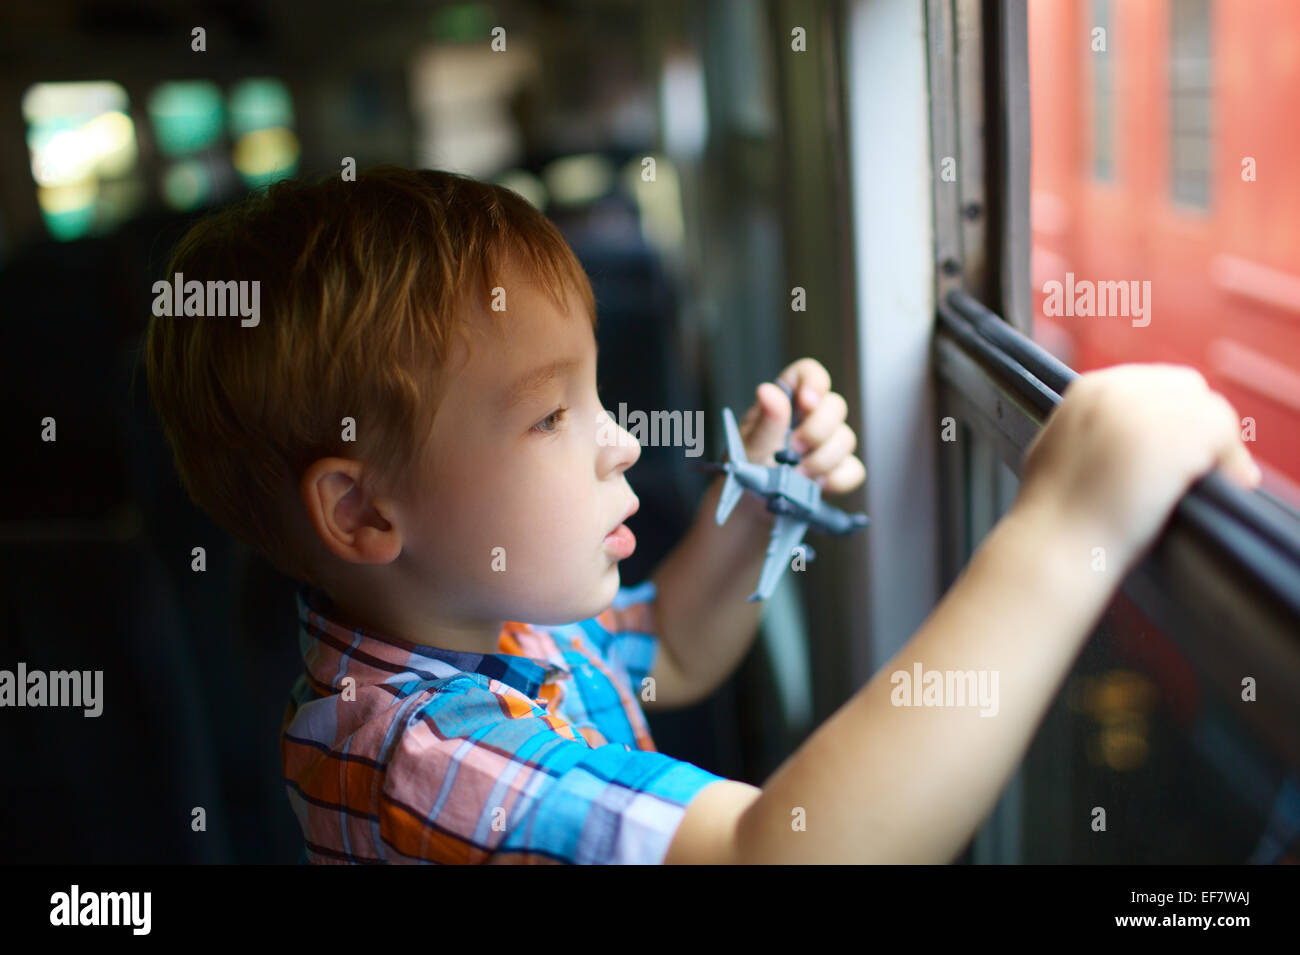 Little boy with toy looking out of train window Stock Photo